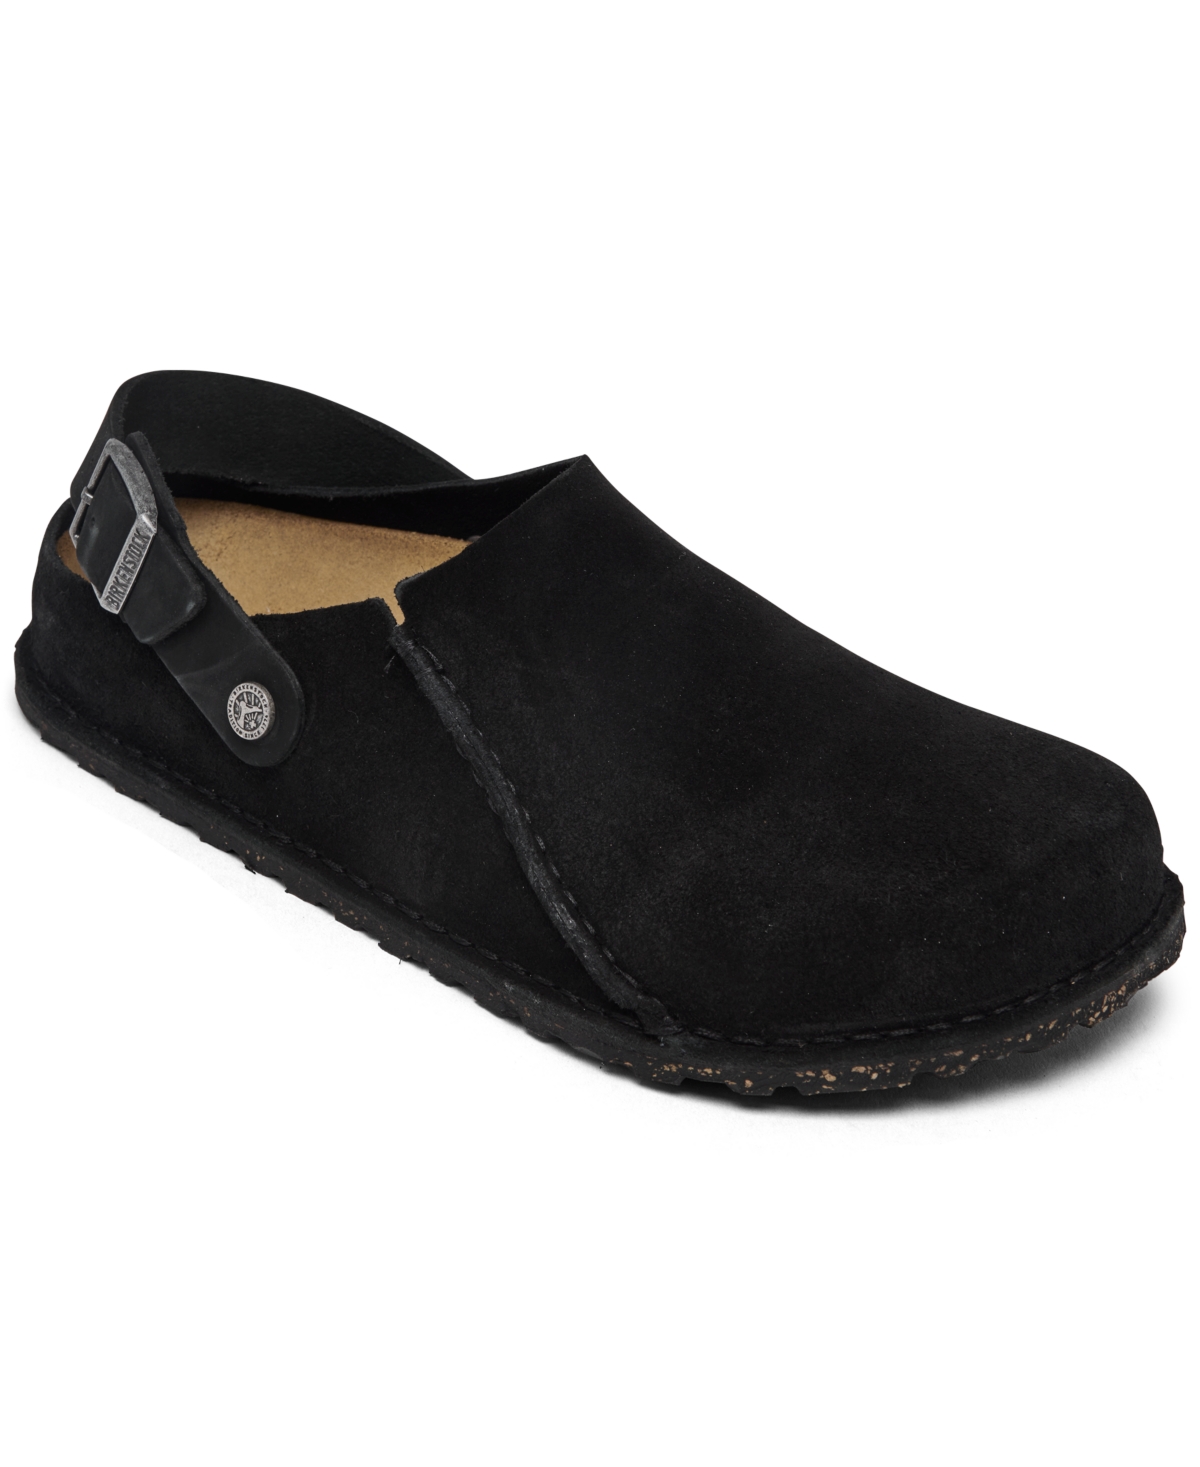 Men's Lutry 365 Suede Clogs from Finish Line - Mink